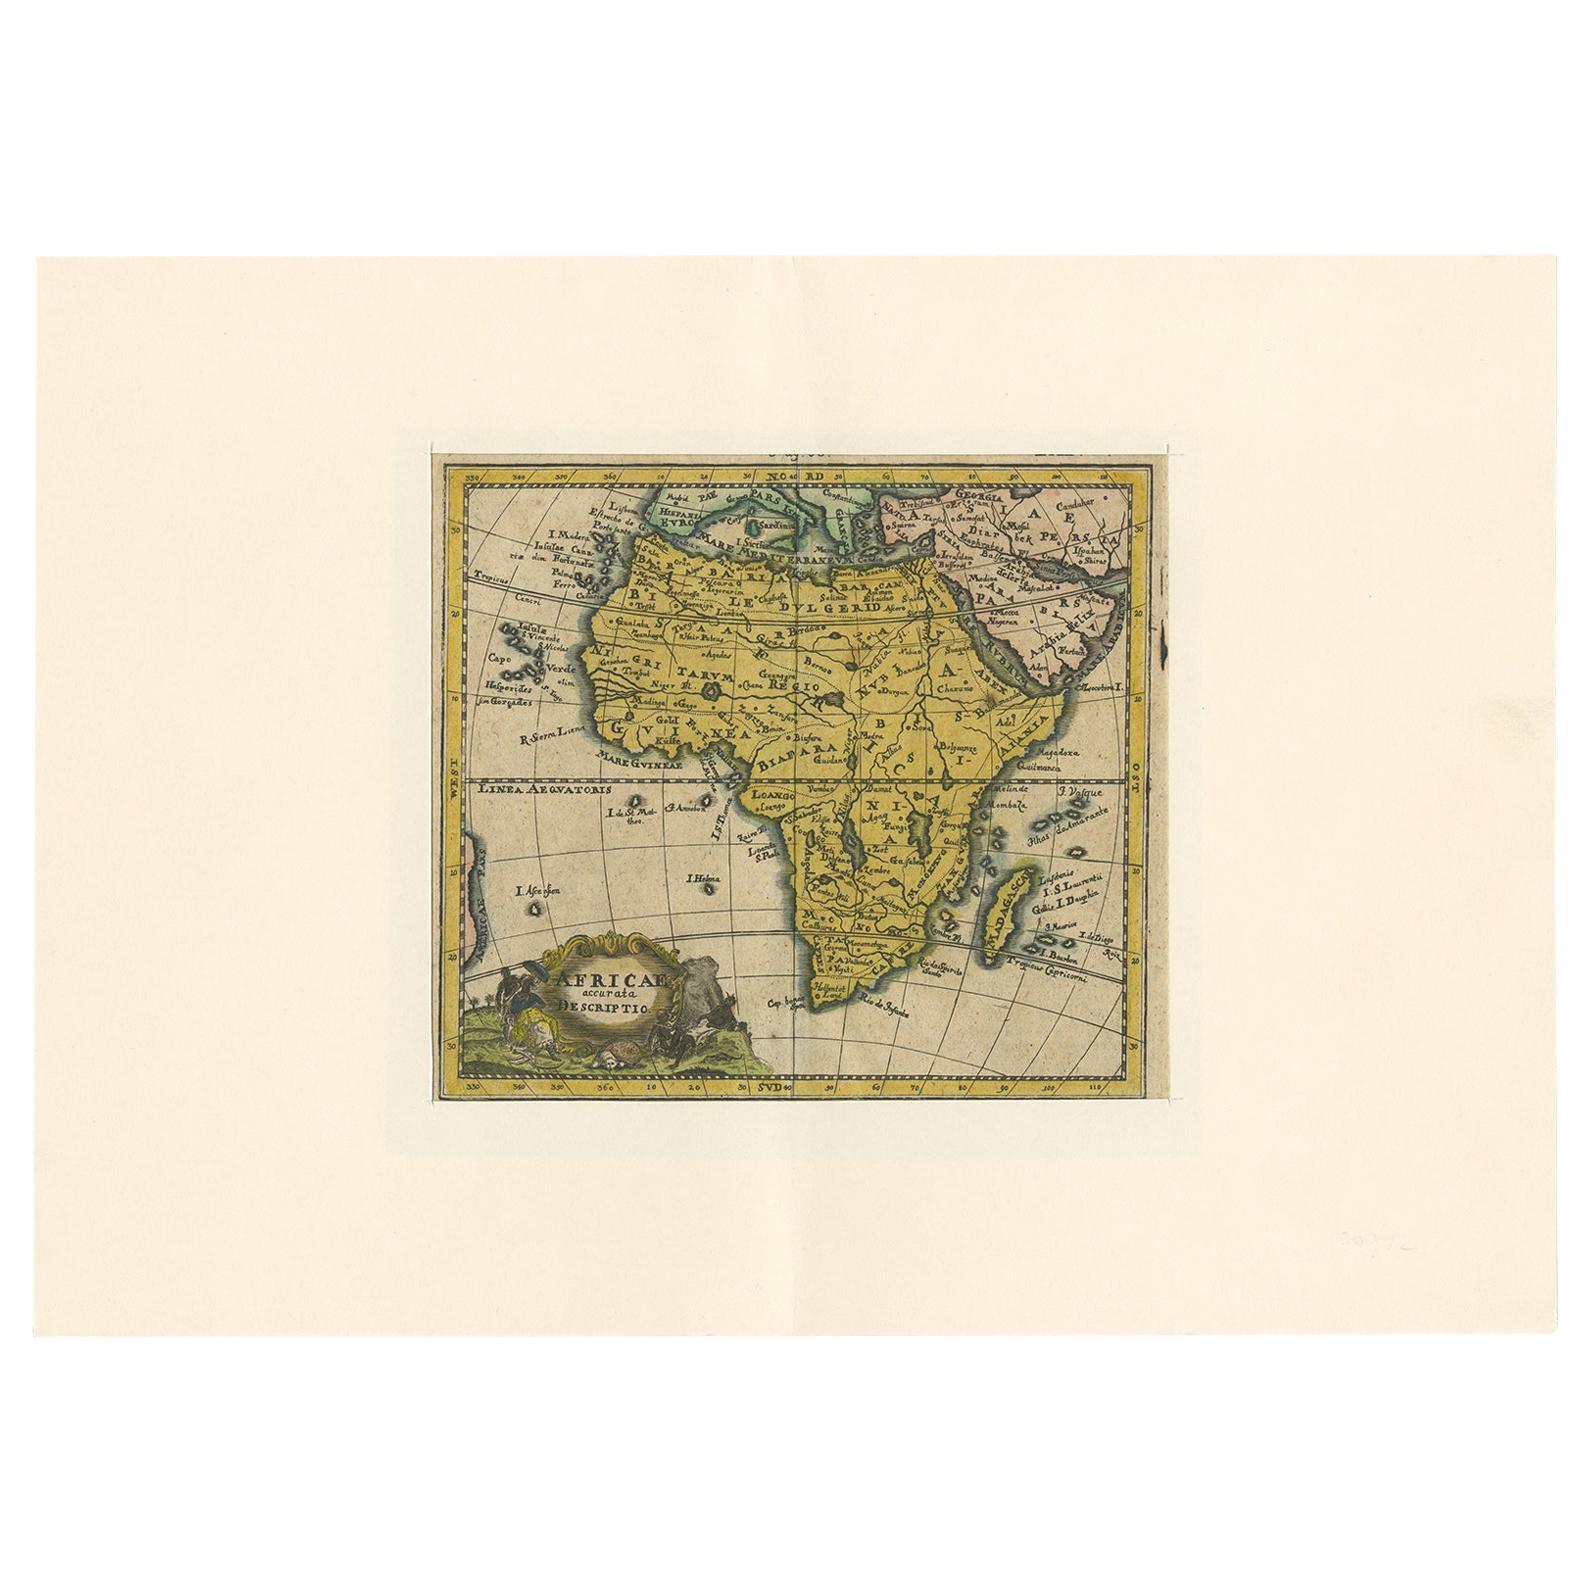 Antique Map of Africa by Hederichs 'circa 1740'